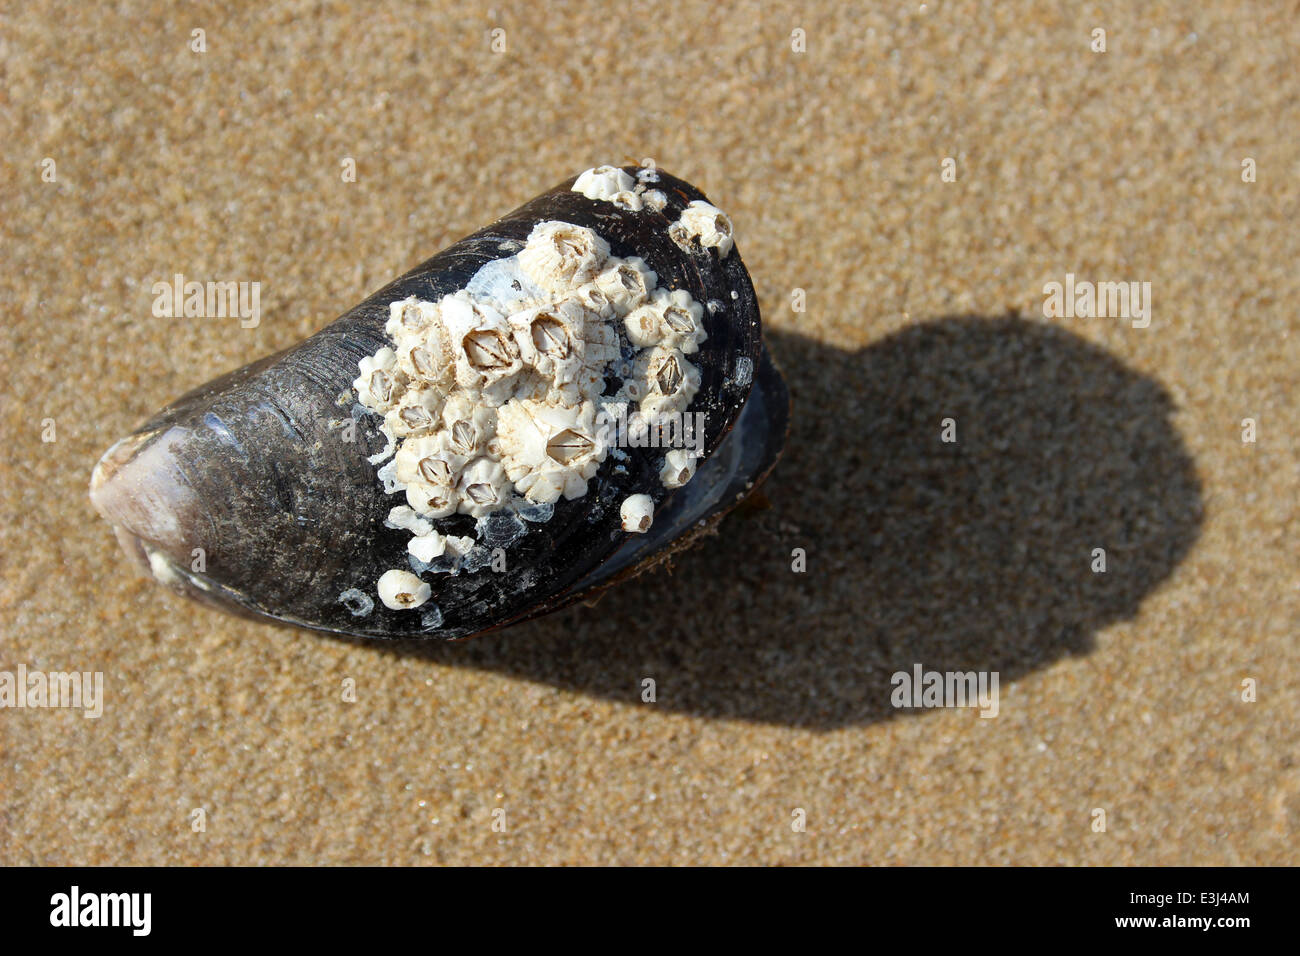 Common Mussels Mytilus edulis Encrusted With Barnacles Stock Photo